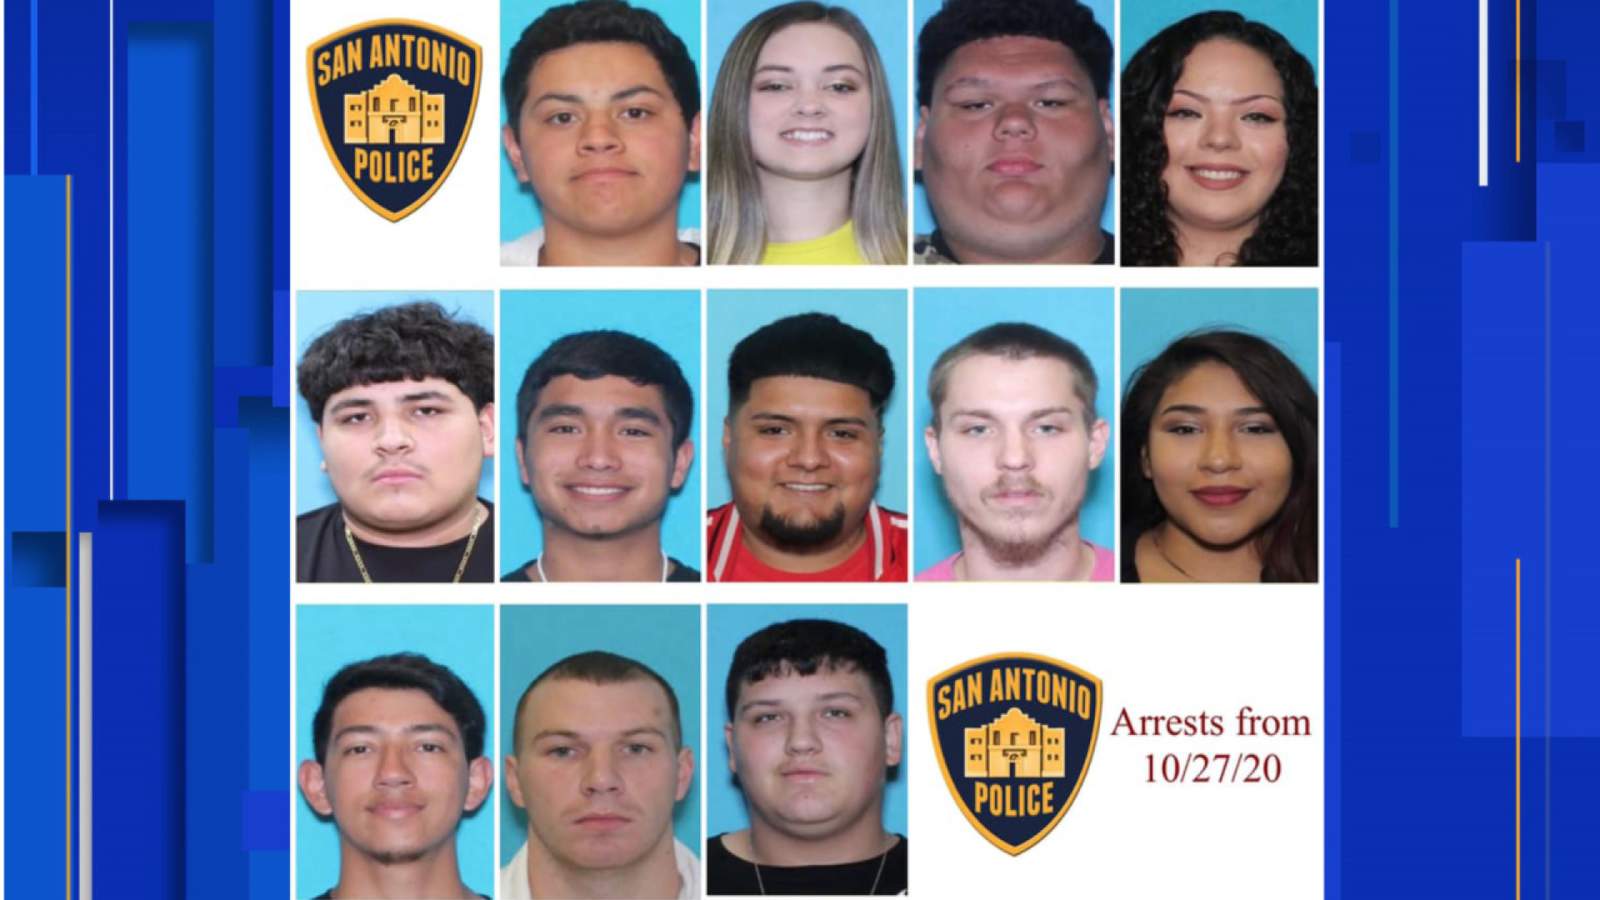 24 arrested, 12 vehicles towed in streetracing crackdown overnight, San Antonio police say